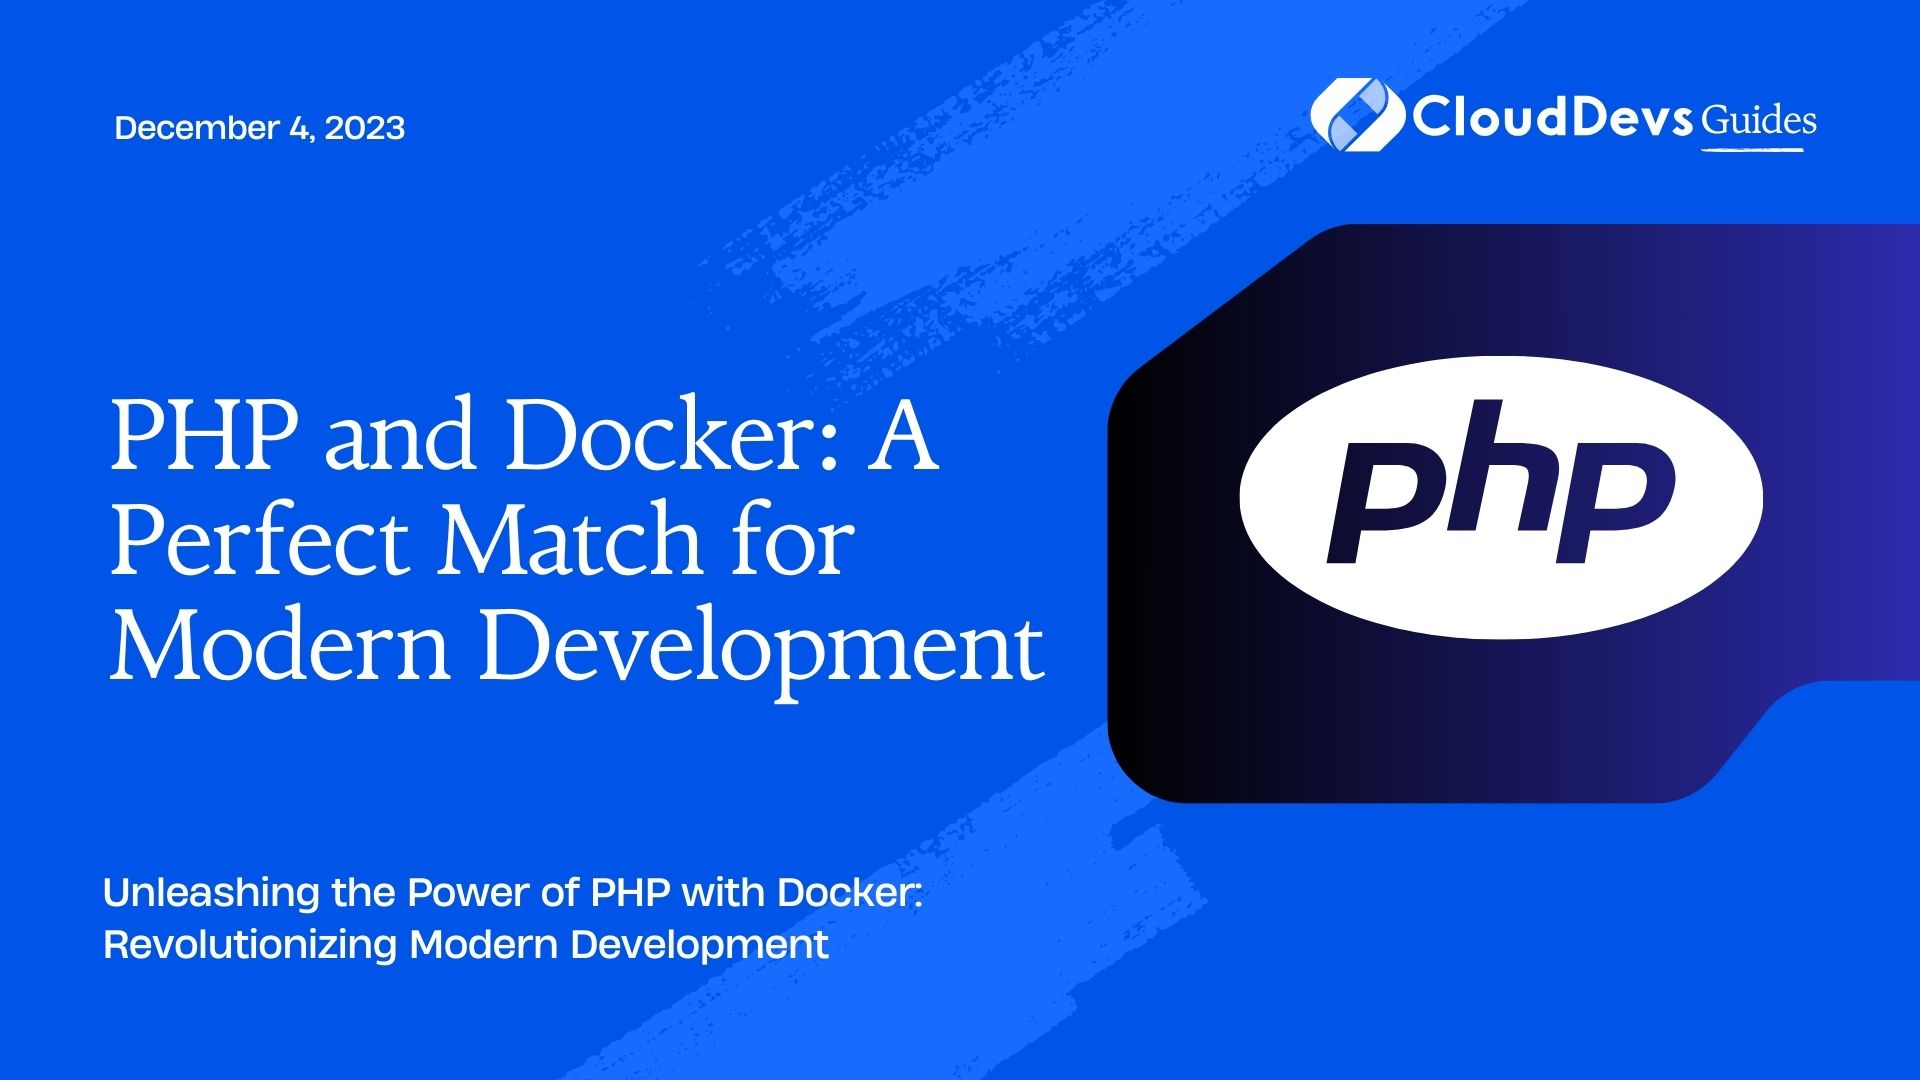 PHP and Docker: A Perfect Match for Modern Development